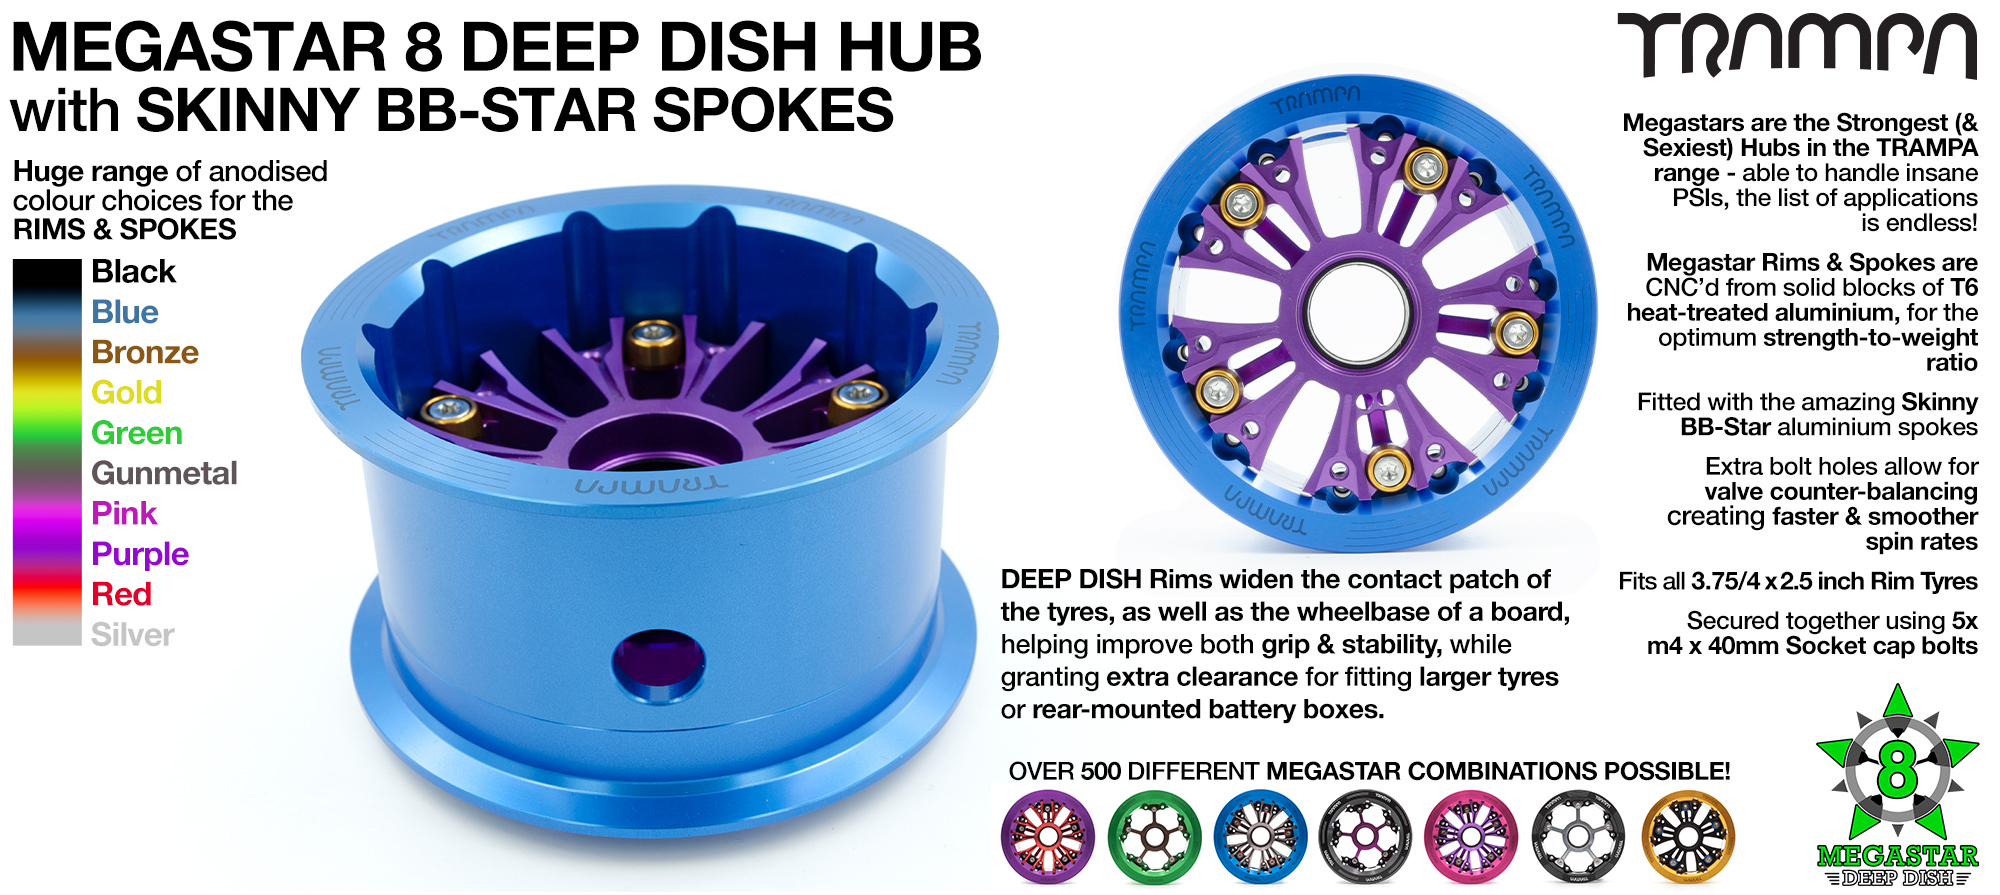 Deep-Dish MEGASTAR 8 - Fits Pneumatic tyres up to 8 Inches in outer diameter 